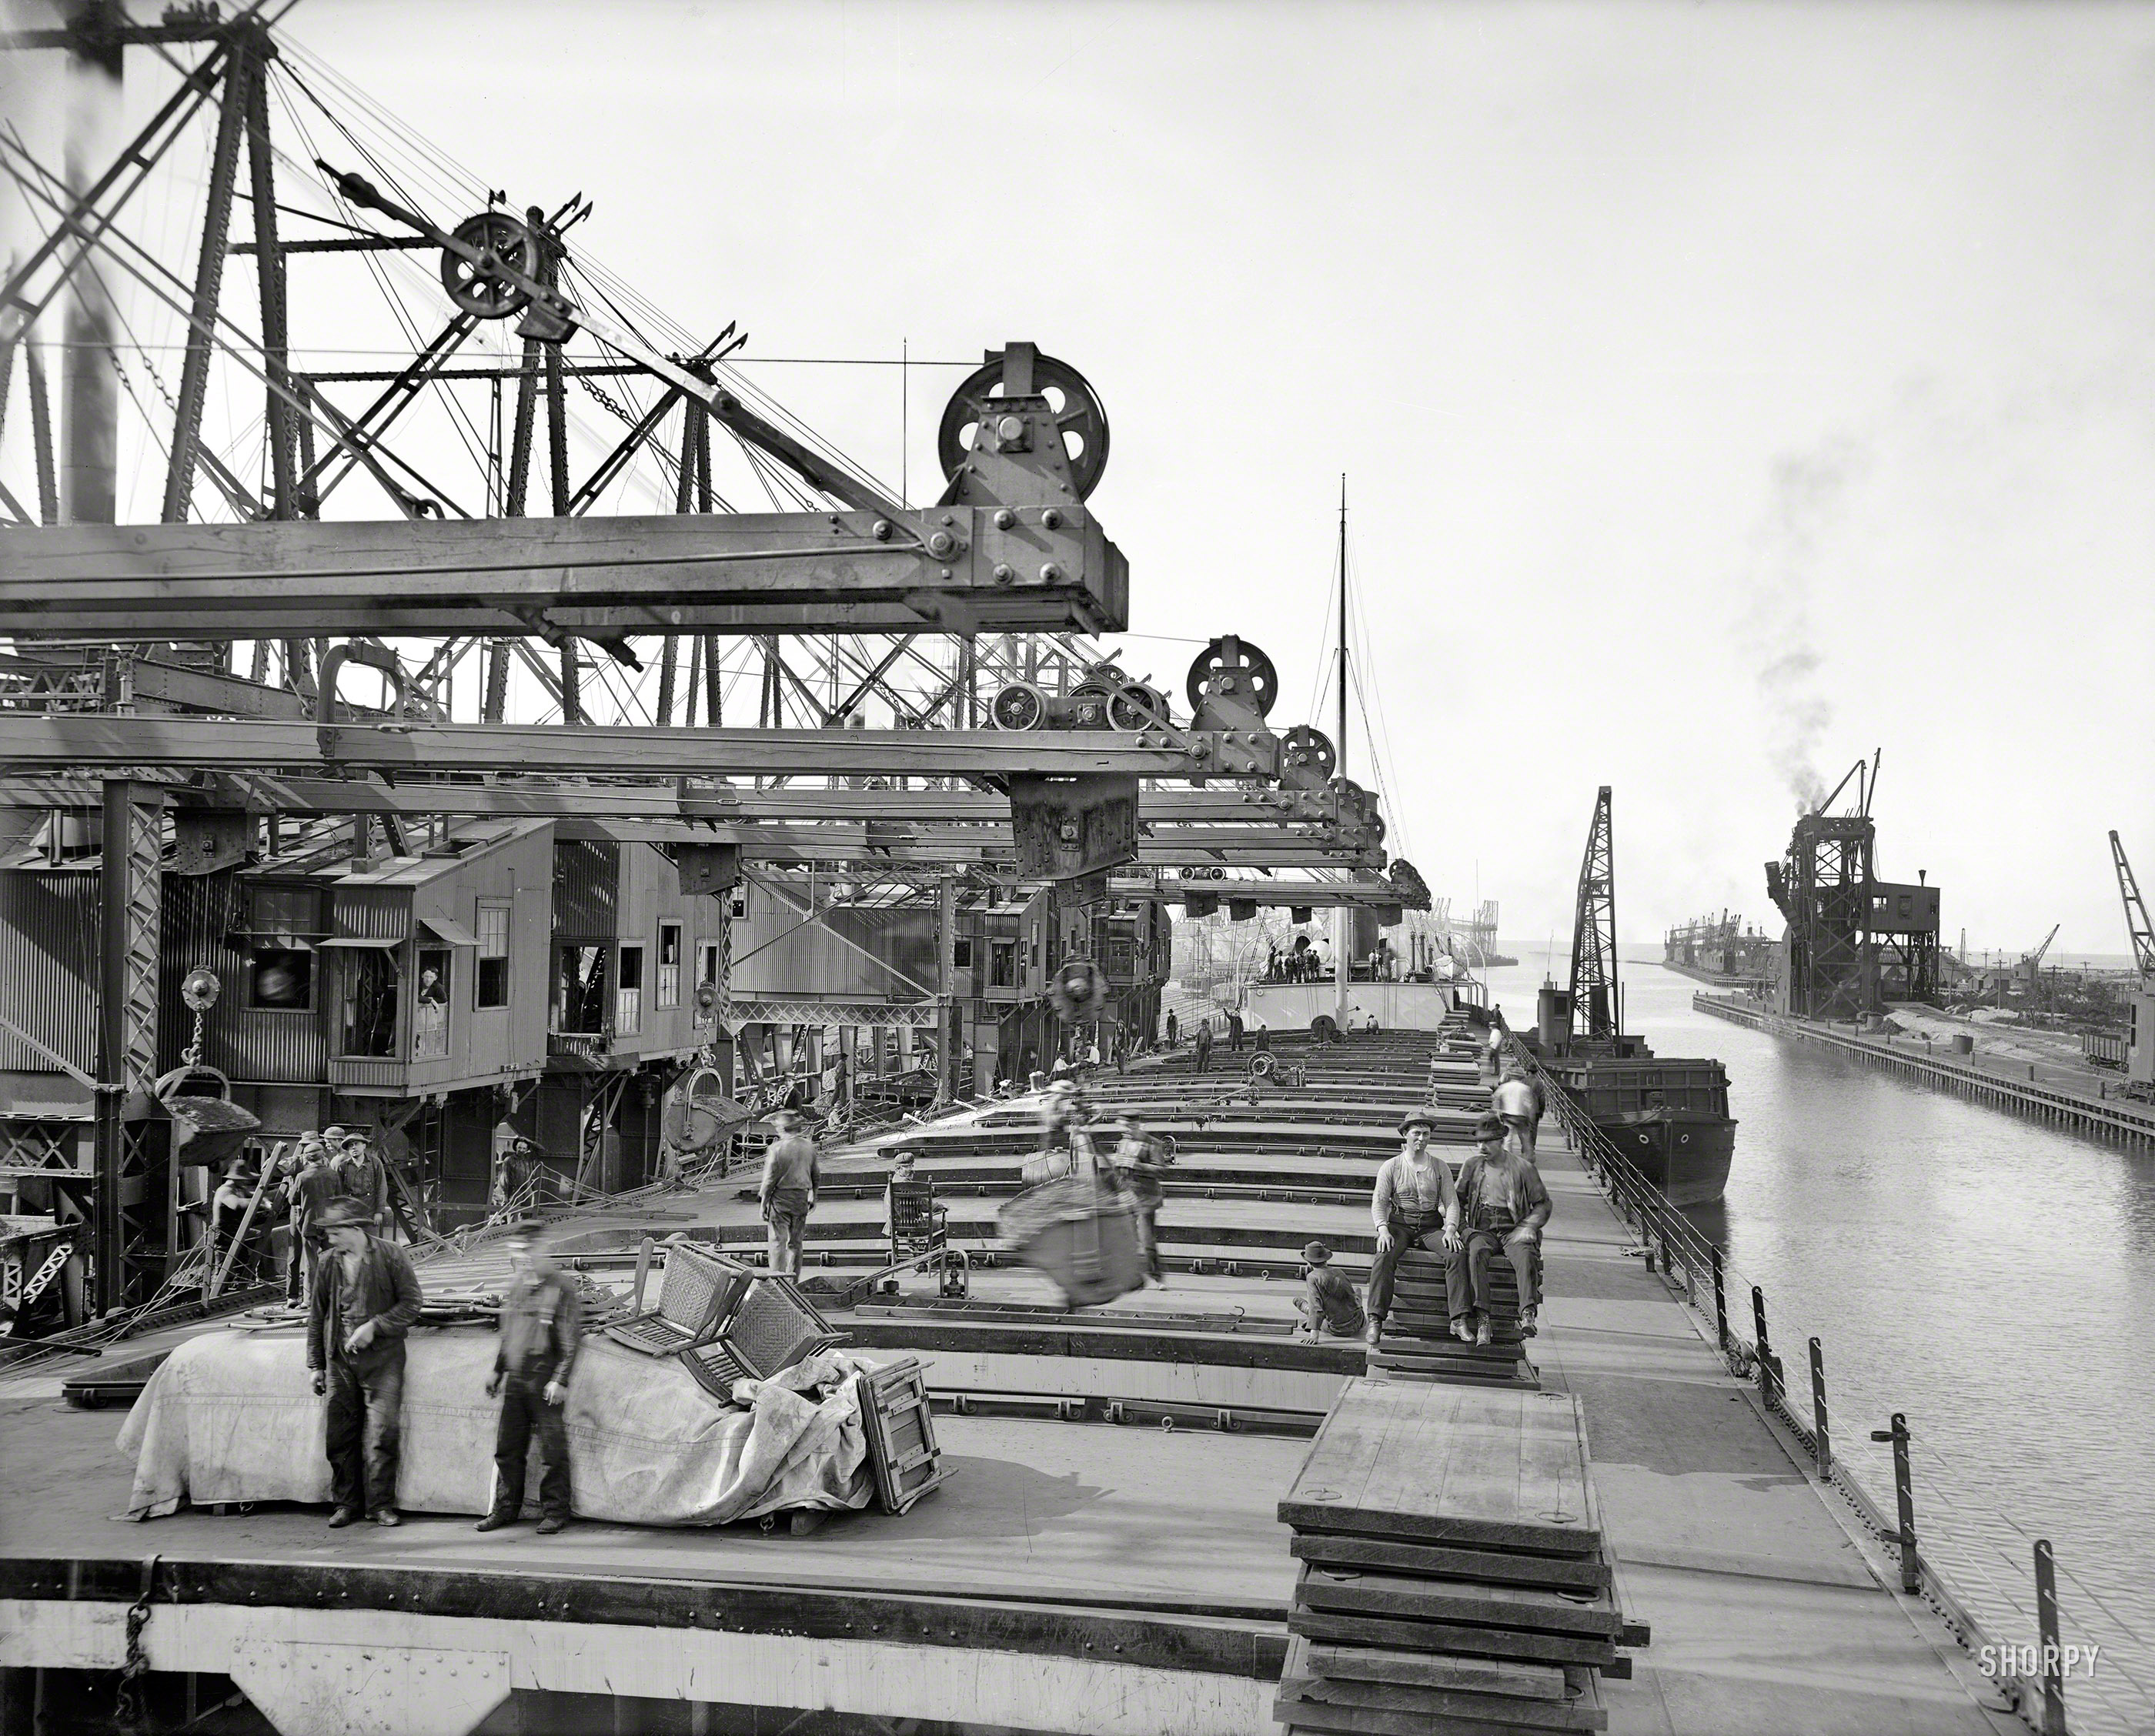 Lake Erie circa 1900. "Unloading ore at Conneaut, Ohio. Brown conveying hoists." 8x10 inch glass negative, Detroit Publishing Company. View full size.